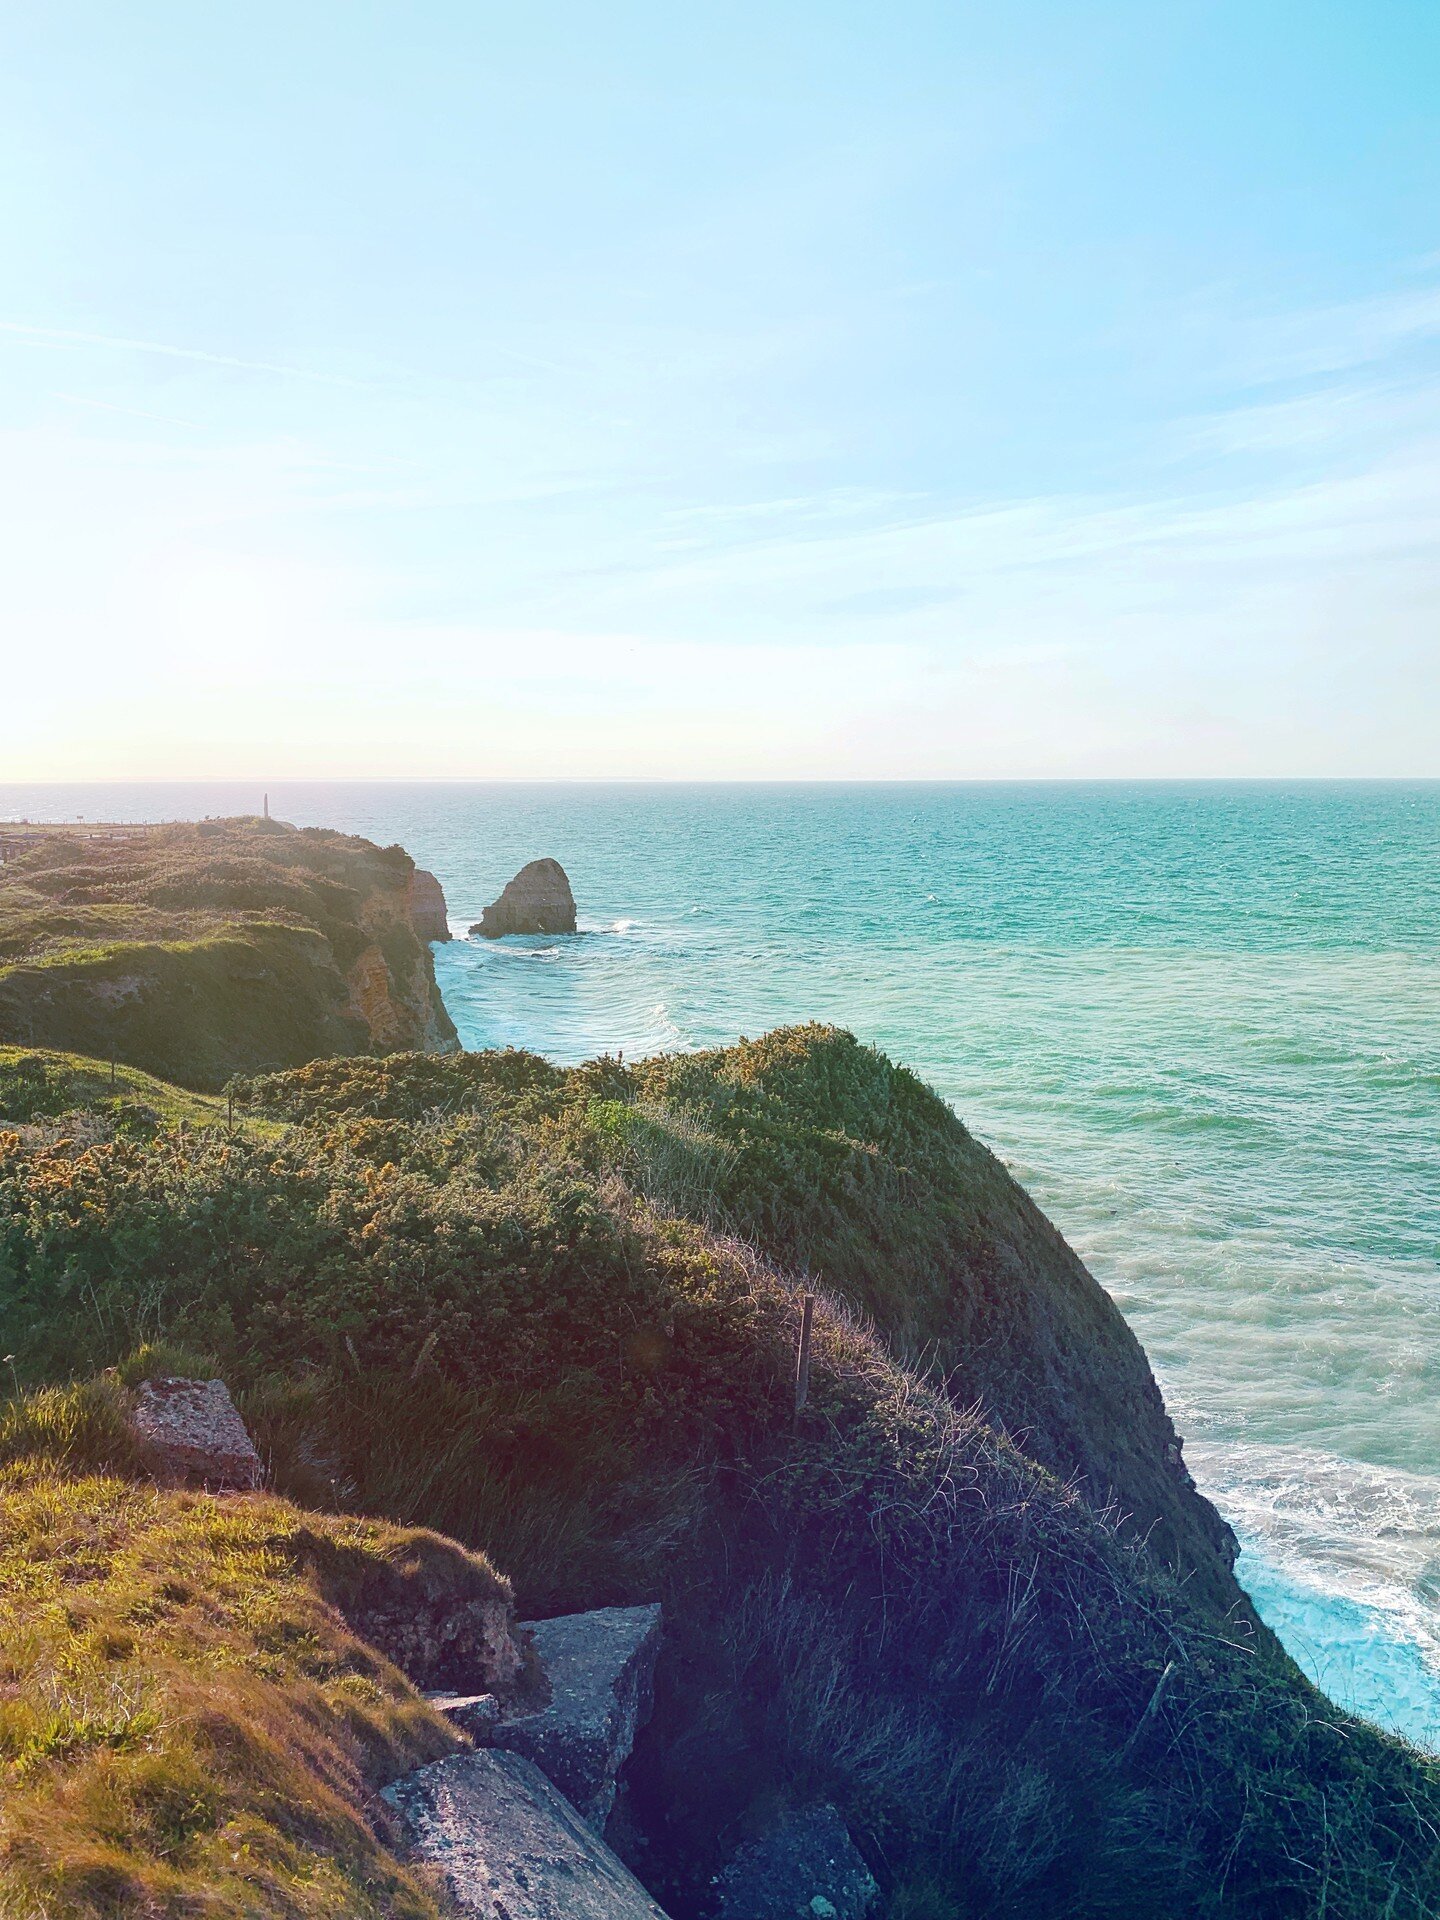 📍Normandy, France | Our weekend of traveling Normandy with kids is #ontheblog! We packed as many spots as we could into 3 days and loved every minute of it. That first photo was one of my favorite spots Pointe du Hoc at sunset. 

Head over to the bl